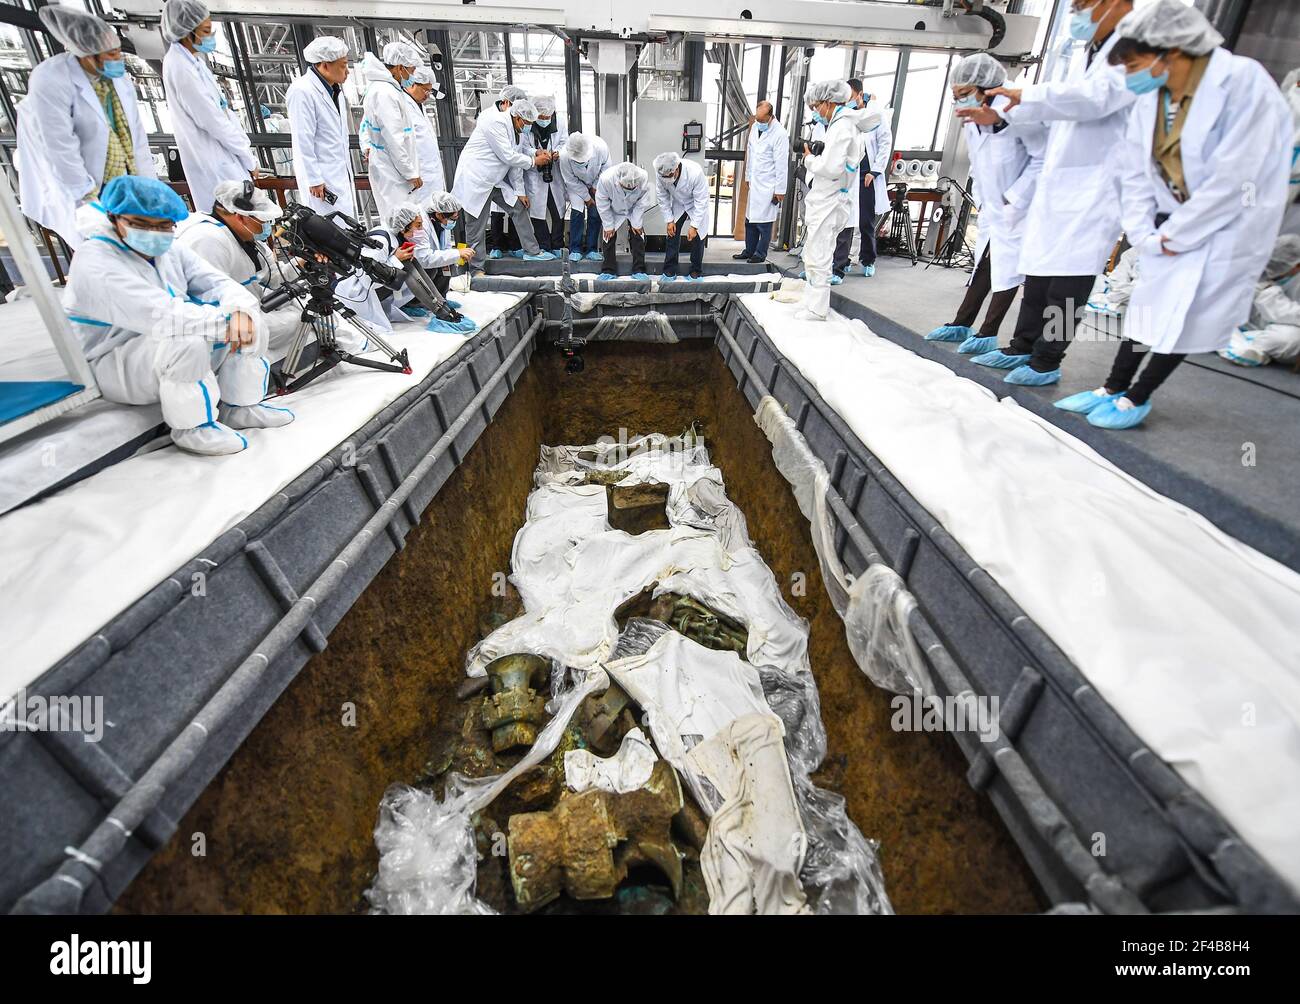 (210320) -- CHENGDU, March 20, 2021 (Xinhua) -- Archaeologists check a sacrificial pit at the Sanxingdui Ruins site in southwest China's Sichuan Province, March 19, 2021. Chinese archaeologists announced Saturday that some new major discoveries have been made at the legendary Sanxingdui Ruins site in southwest China, helping shed light on the cultural origins of the Chinese nation. Archaeologists have found six new sacrificial pits and unearthed more than 500 items dating back about 3,000 years at the Sanxingdui Ruins in Sichuan Province, the National Cultural Heritage Administration announ Stock Photo